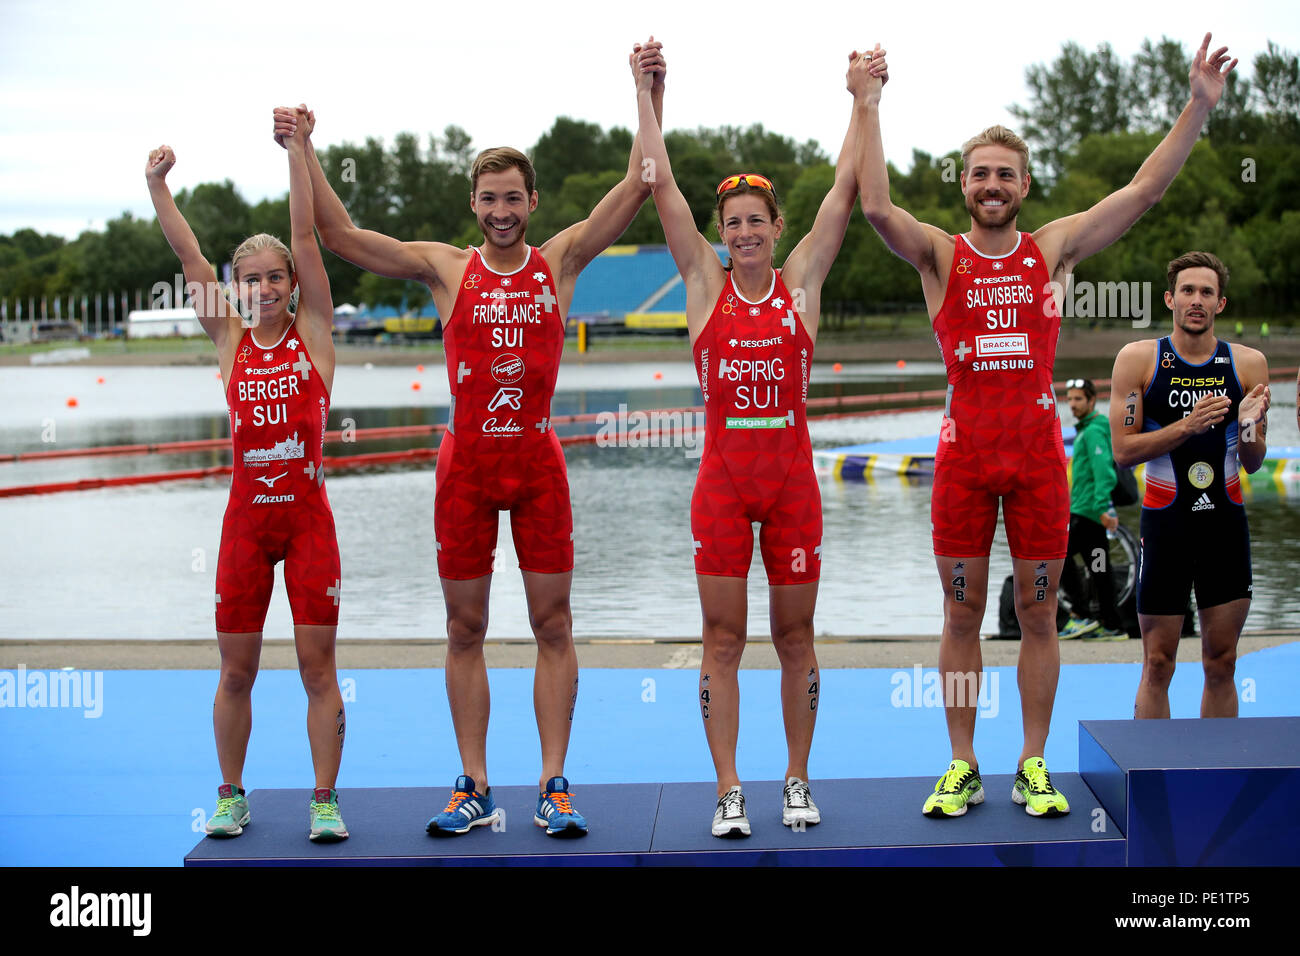 Silver medal winners Switzerland's Lisa Berger, Andrea Salvisberg, Nicola Spirig and Sylvain Fridelance for the Triathlon Mixed team relay during day ten of the 2018 European Championships at Strathclyde Country Park, Lanarkshire. PRESS ASSOCIATION Photo. Picture date: Saturday August 11, 2018. See PA story TRIATHLON European. Photo credit should read: John Walton/PA Wire. RESTRICTIONS: Editorial use only, no commercial use without prior permission Stock Photo